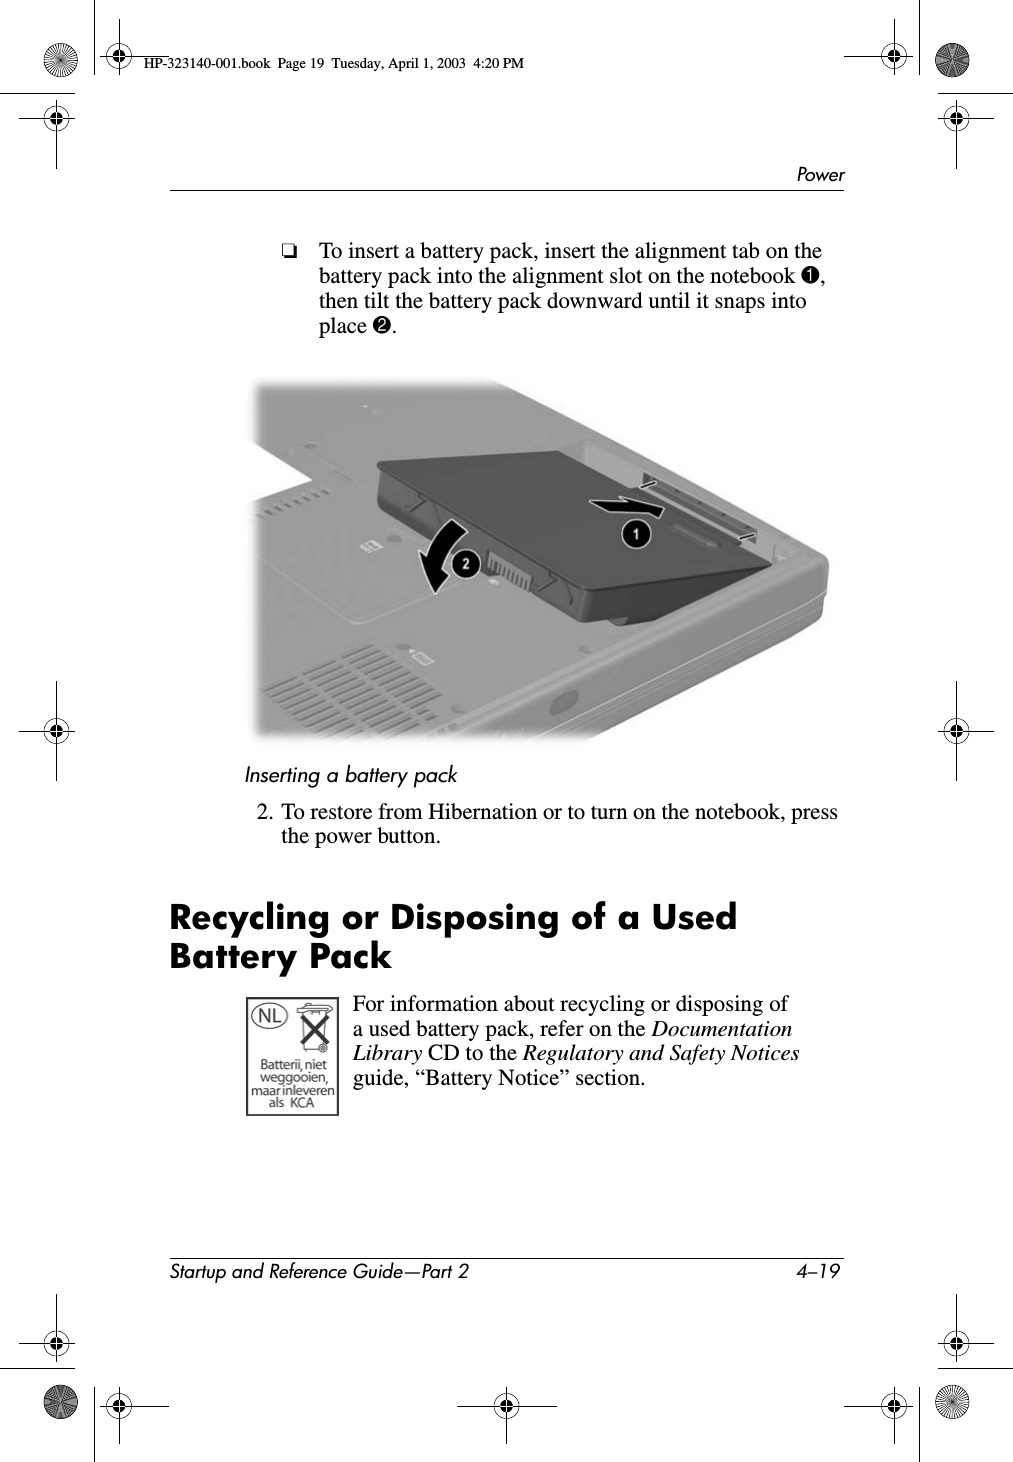 PowerStartup and Reference Guide—Part 2 4–19❏To insert a battery pack, insert the alignment tab on the battery pack into the alignment slot on the notebook 1,then tilt the battery pack downward until it snaps into place 2.Inserting a battery pack2. To restore from Hibernation or to turn on the notebook, press the power button. Recycling or Disposing of a Used Battery PackFor information about recycling or disposing of a used battery pack, refer on the DocumentationLibrary CD to the Regulatory and Safety Notices guide, “Battery Notice” section.HP-323140-001.book  Page 19  Tuesday, April 1, 2003  4:20 PM